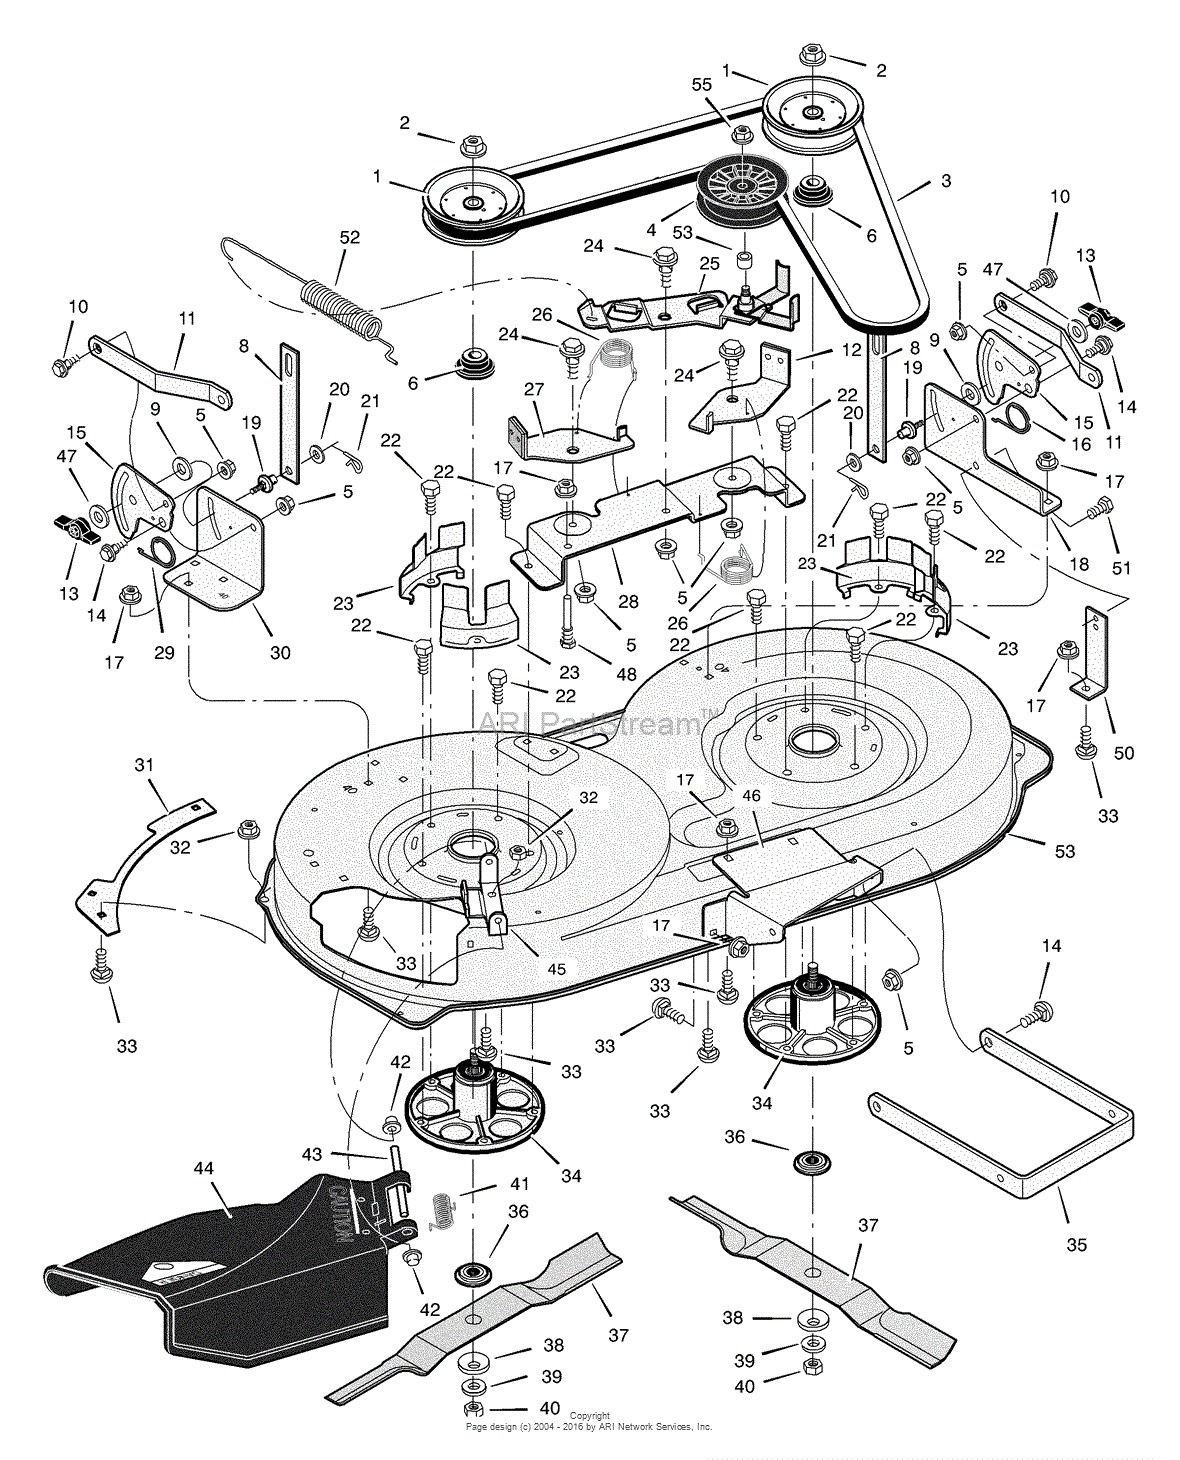 Parts Breakdown Of Electrical On 2004 4.6 Liter Murray X68a Lawn Tractor 2004 Parts Diagram for Mower Housing Of Parts Breakdown Of Electrical On 2004 4.6 Liter